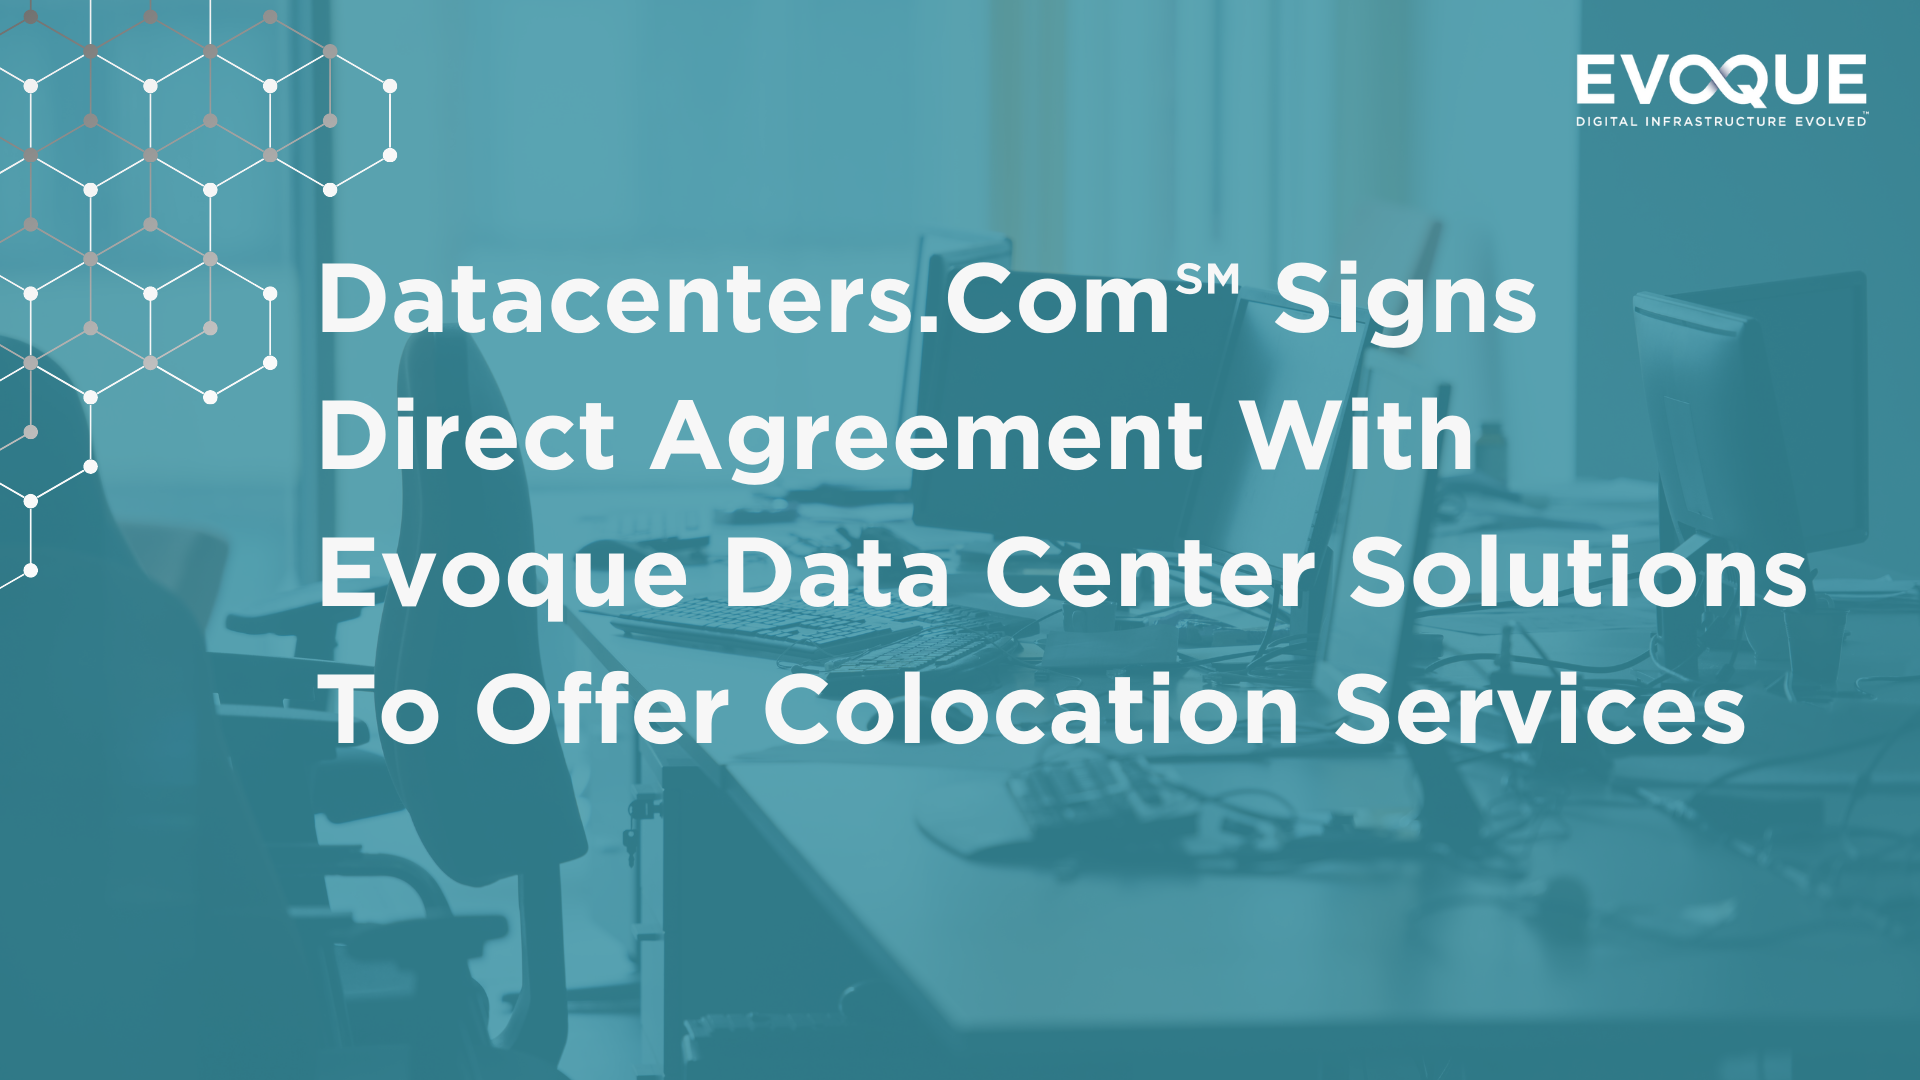 Datacenters.Com℠ Signs Direct Agreement With Evoque Data Center Solutions™ To Offer Colocation Services